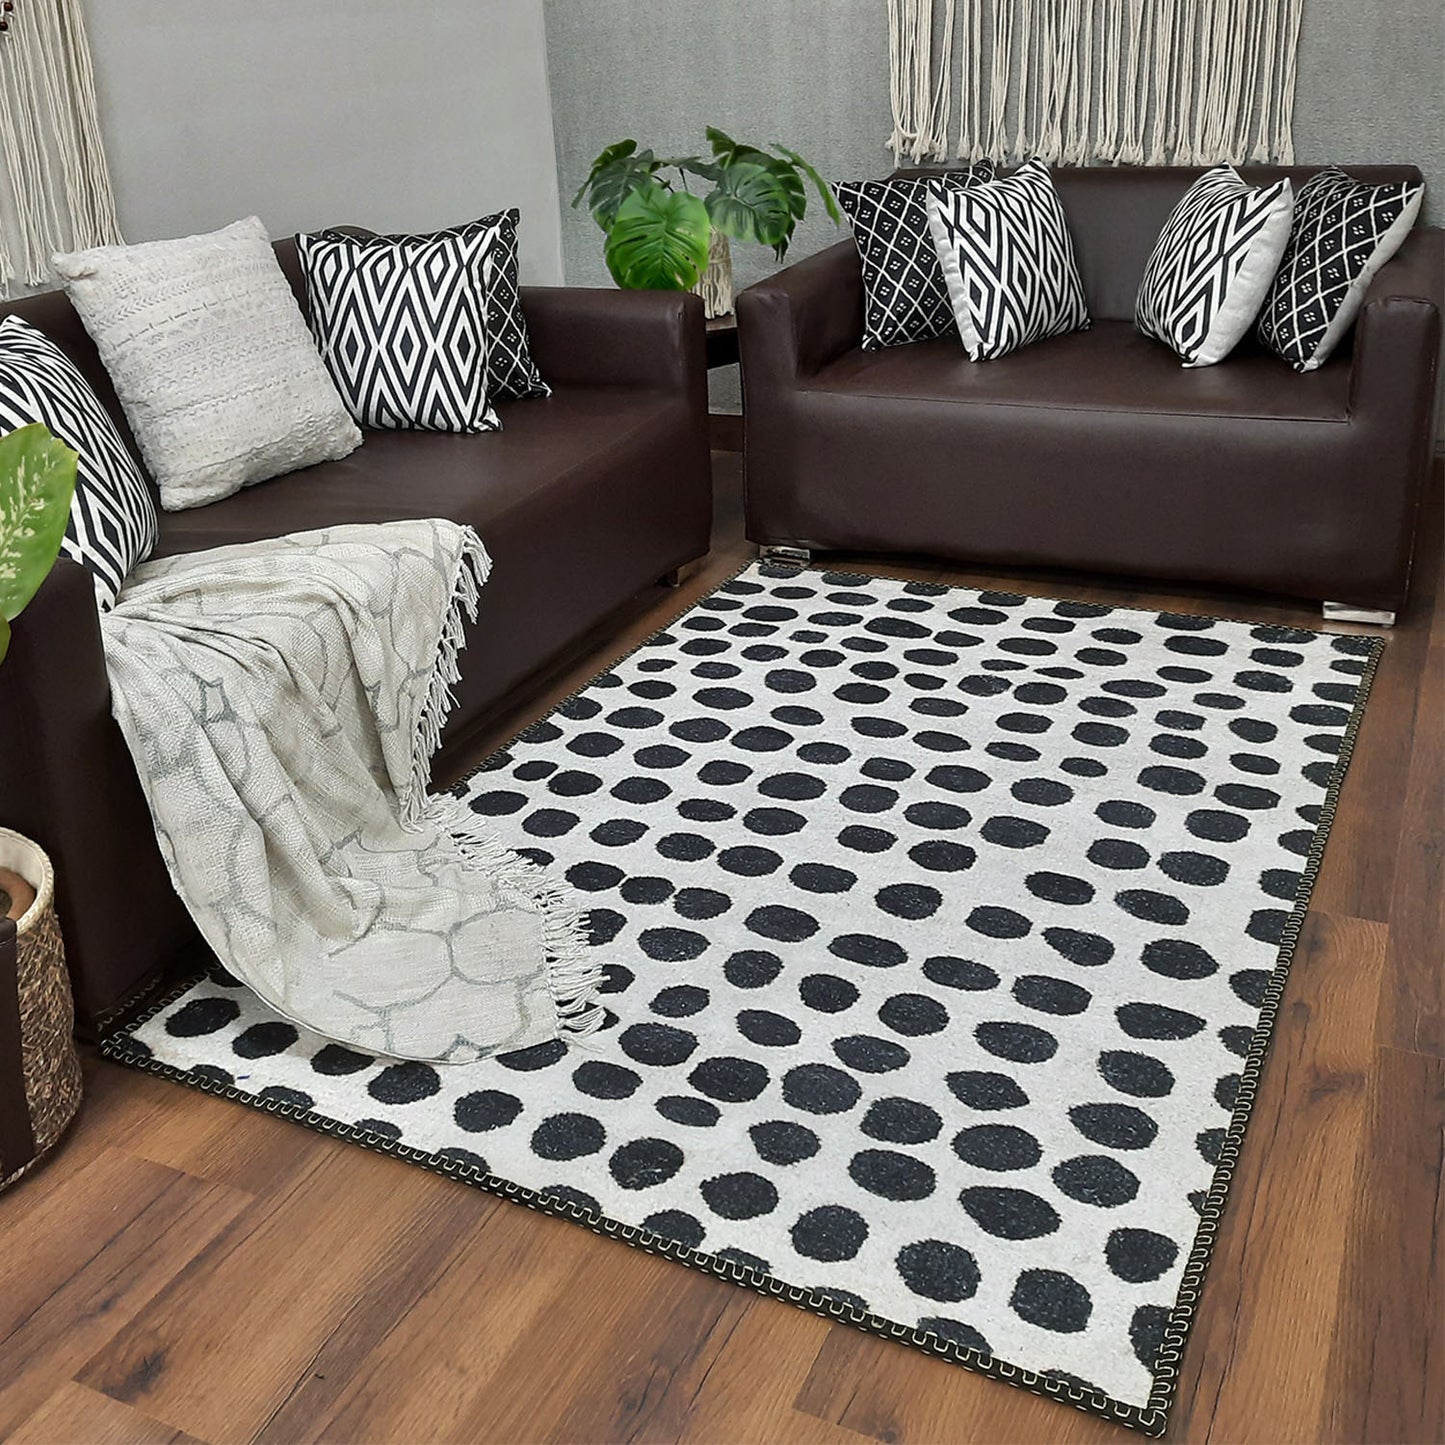 Avioni Faux Silk Carpet for a Stylish and Modern Living Room Monochrome theme | Durable and Washable